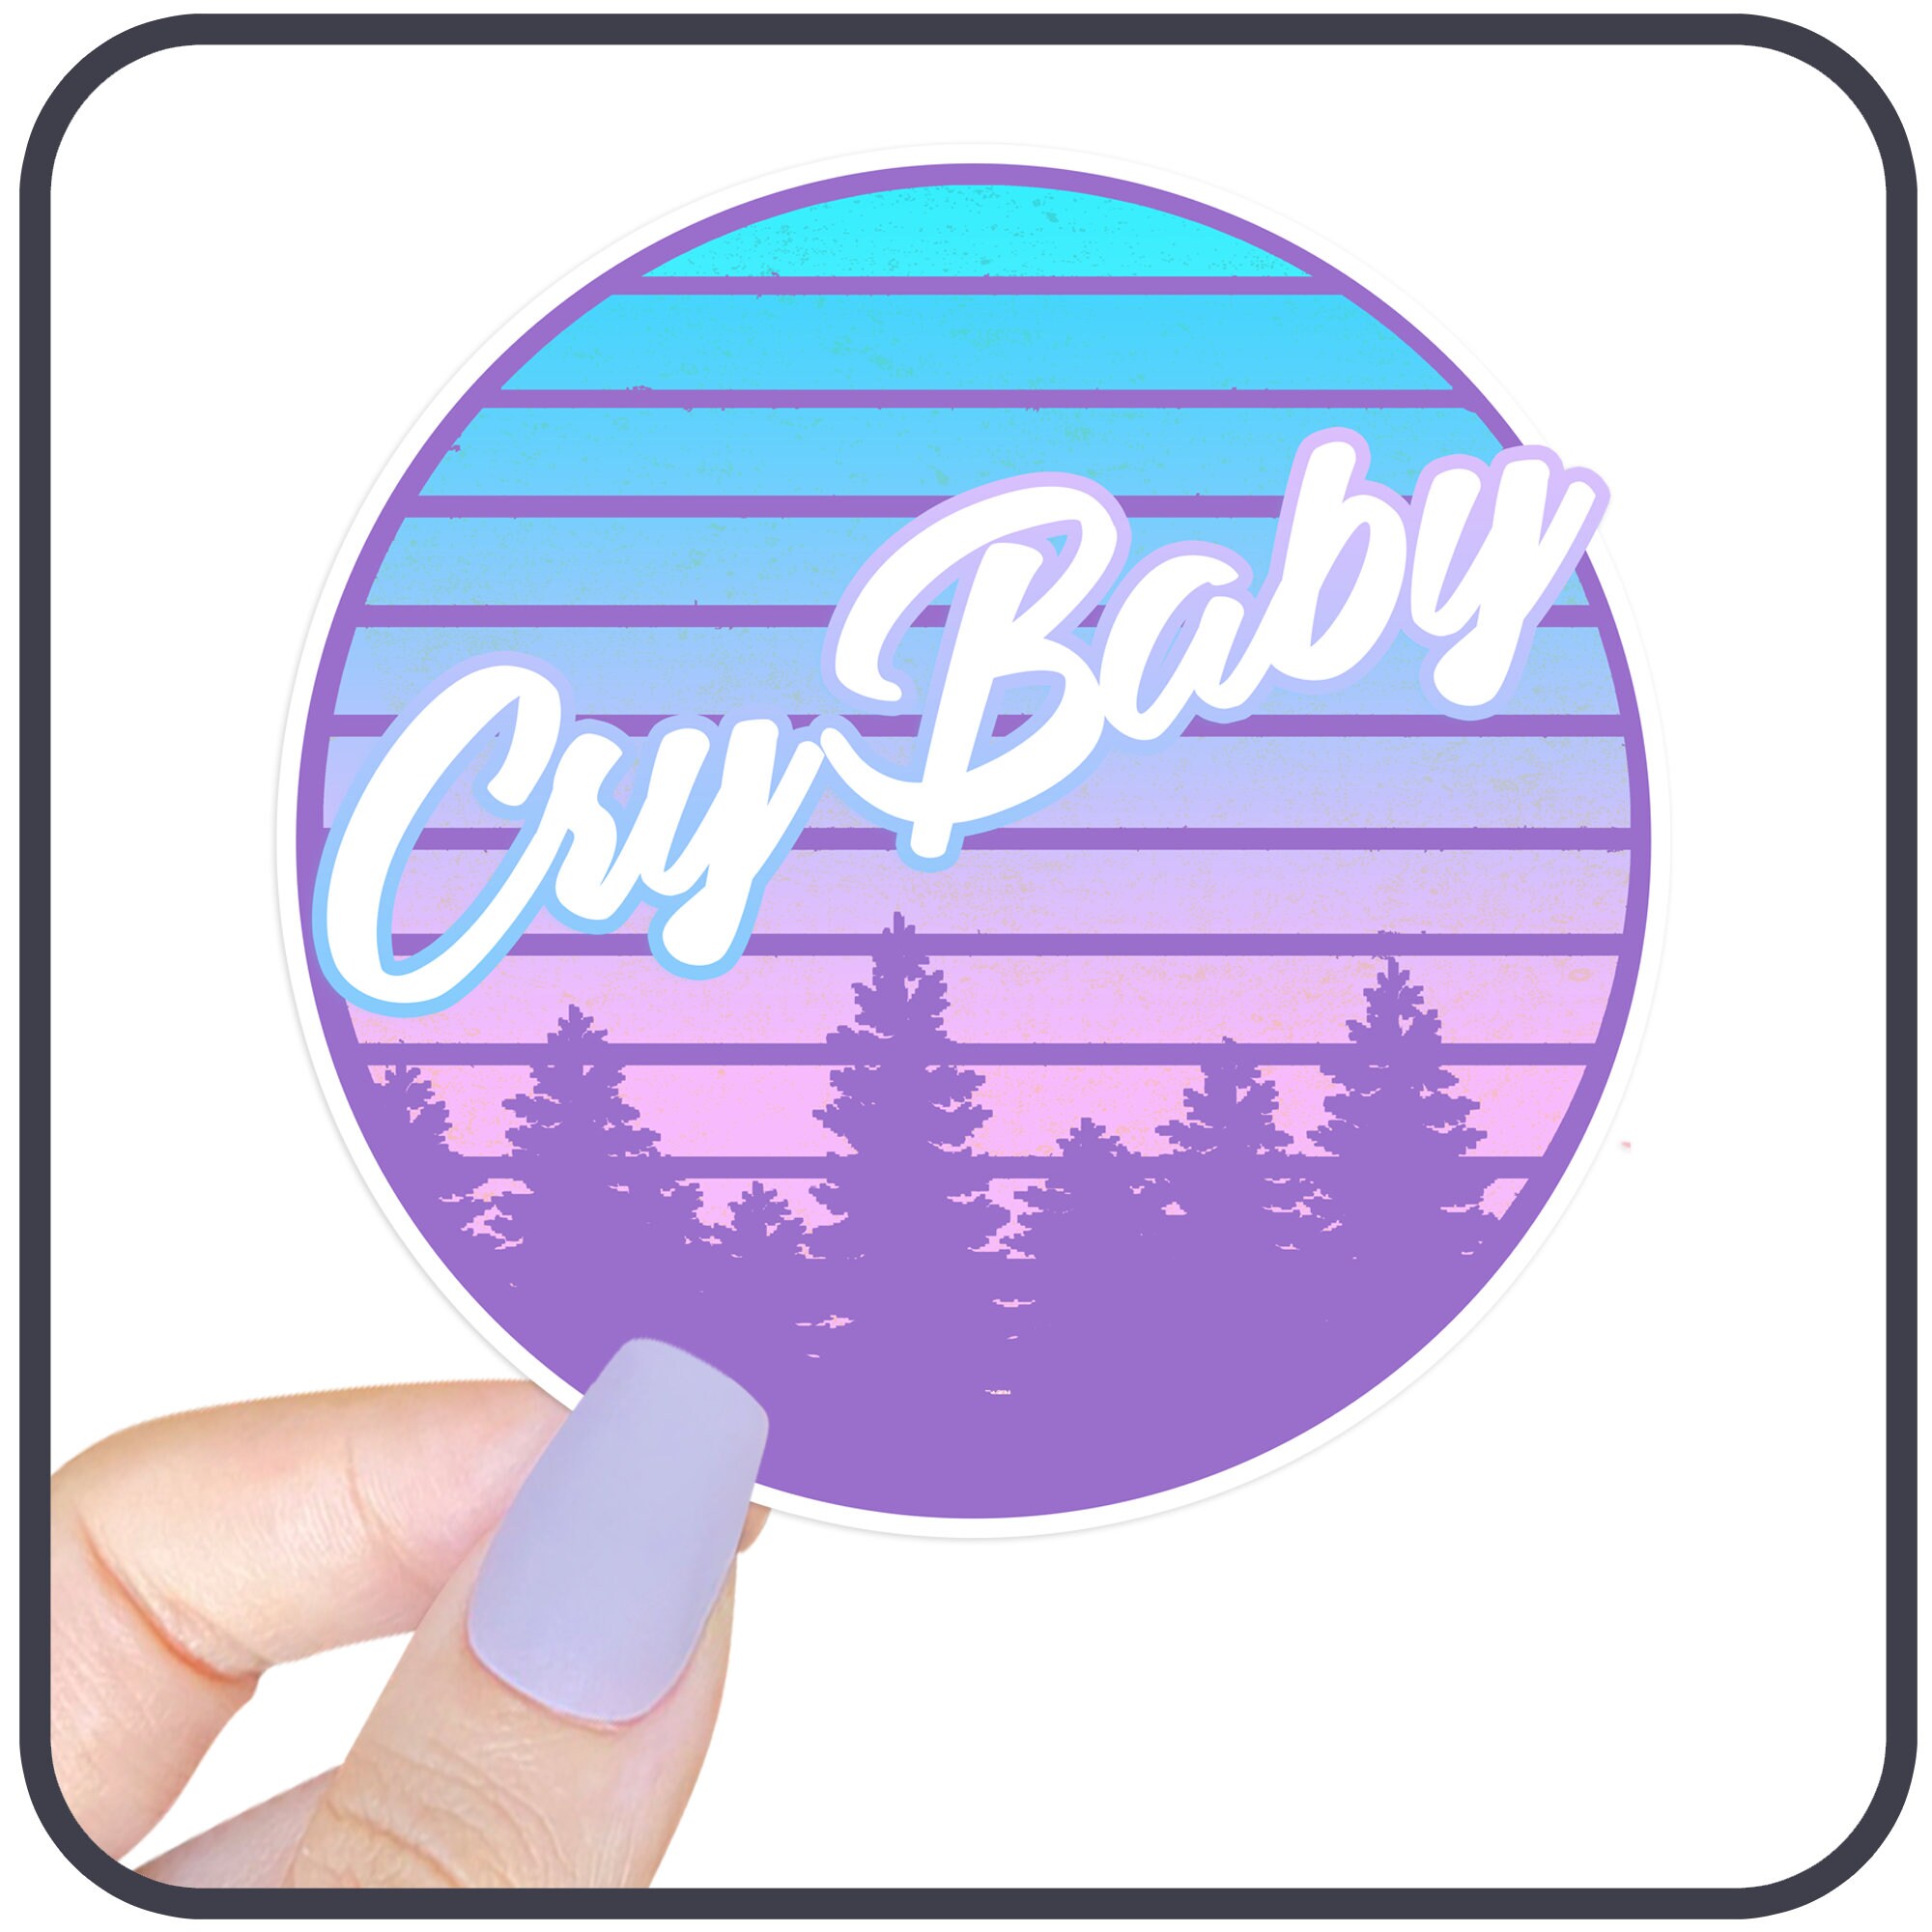 CRY BABY STICKERS